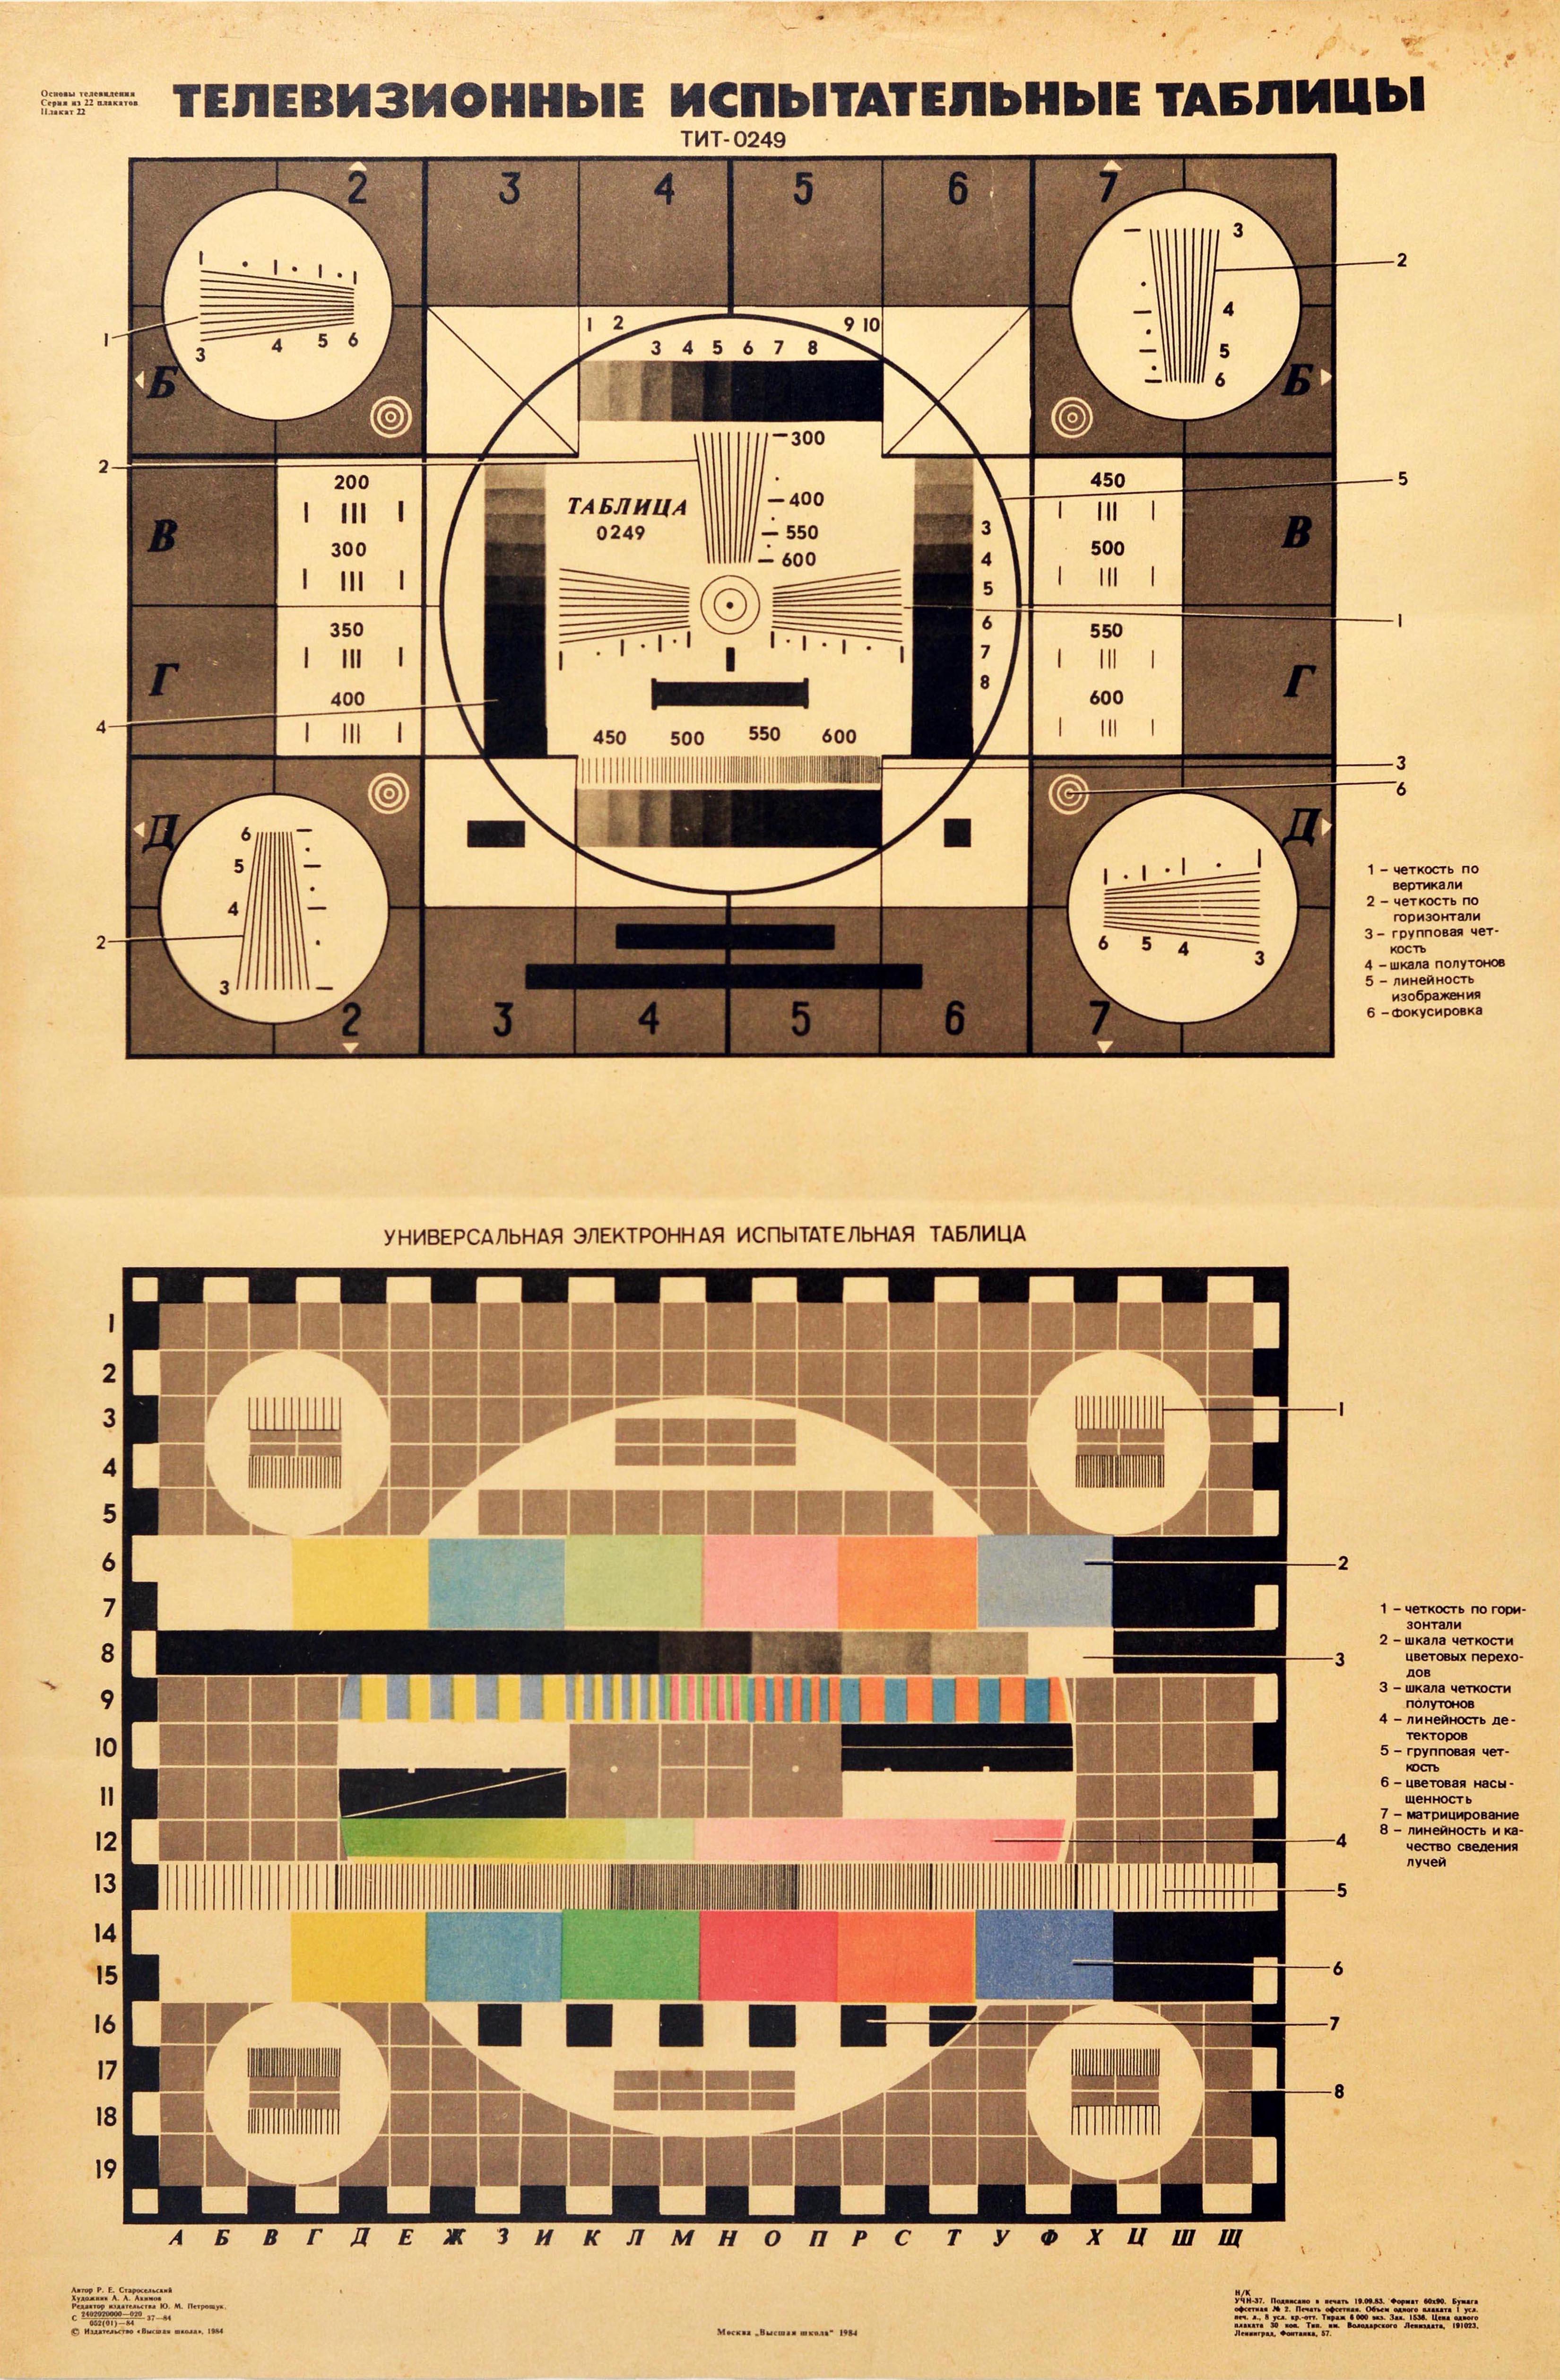 Original vintage Soviet poster featuring two television test cards featuring patterns composed of squares and circles - one in black and white and the other in colour - both with labels indicating the various elements to be tested. Good condition,